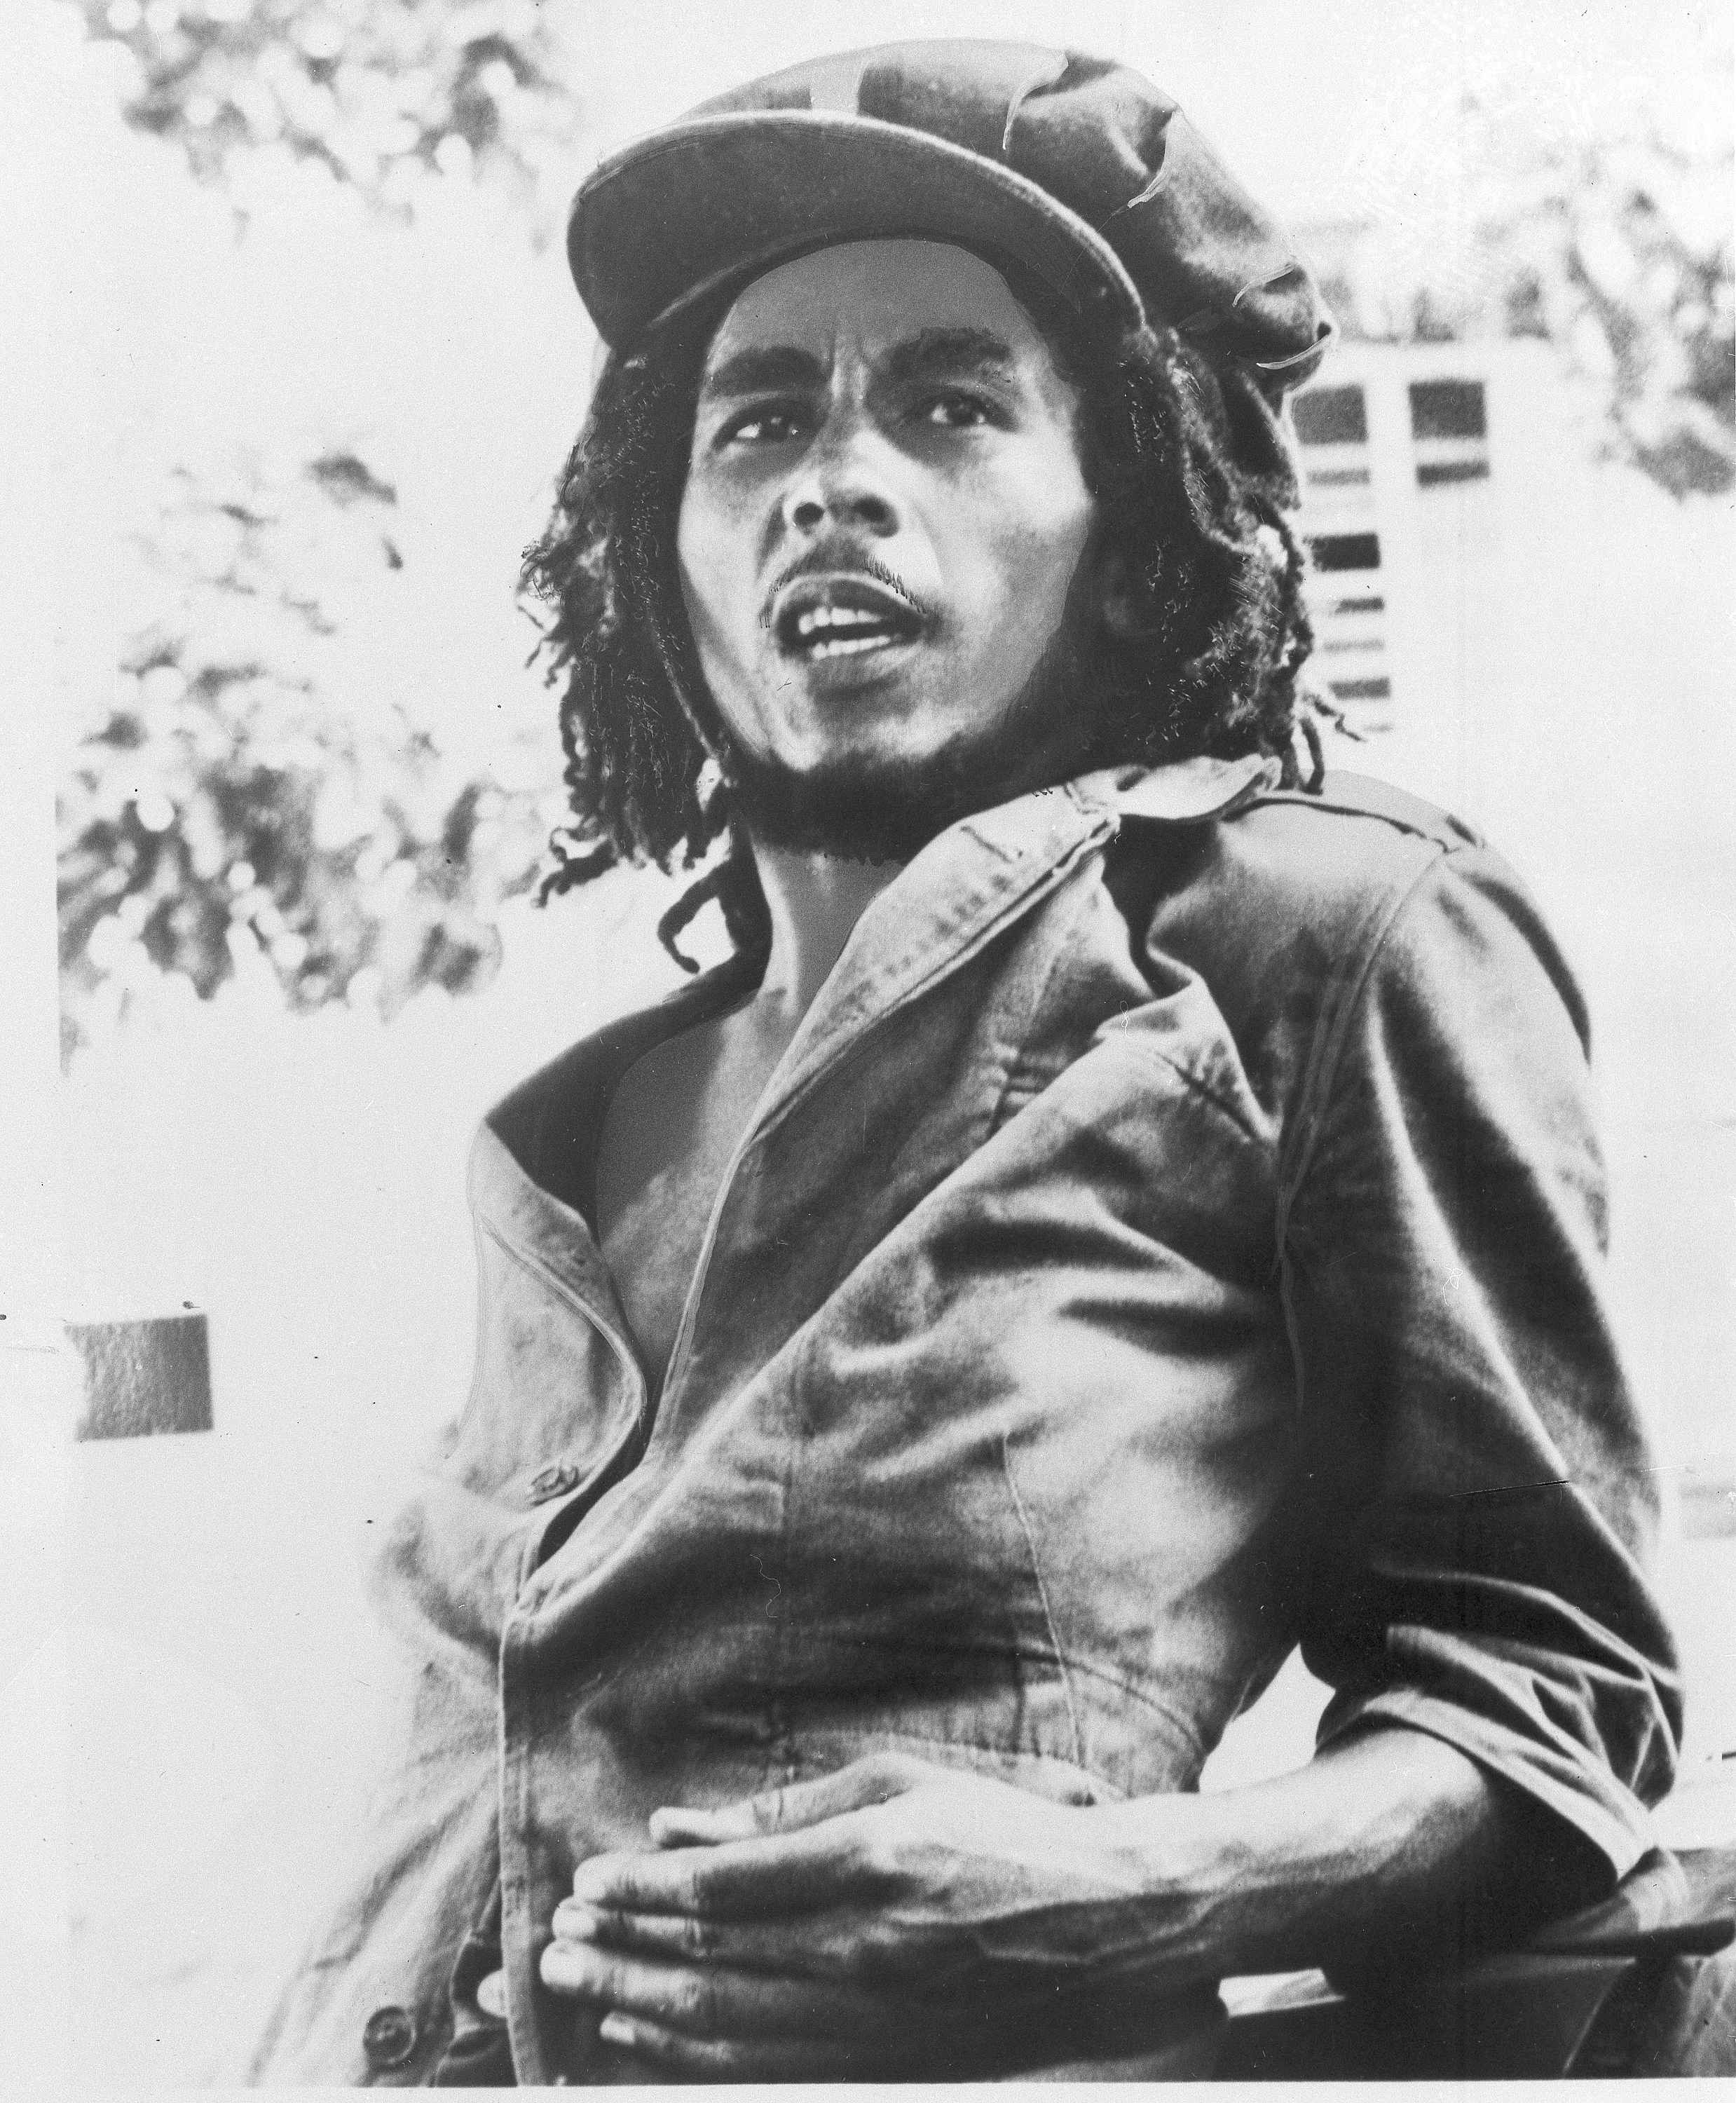 (Bob) MARLEY movie review (and related thoughts) | KRucialReggae's Blog